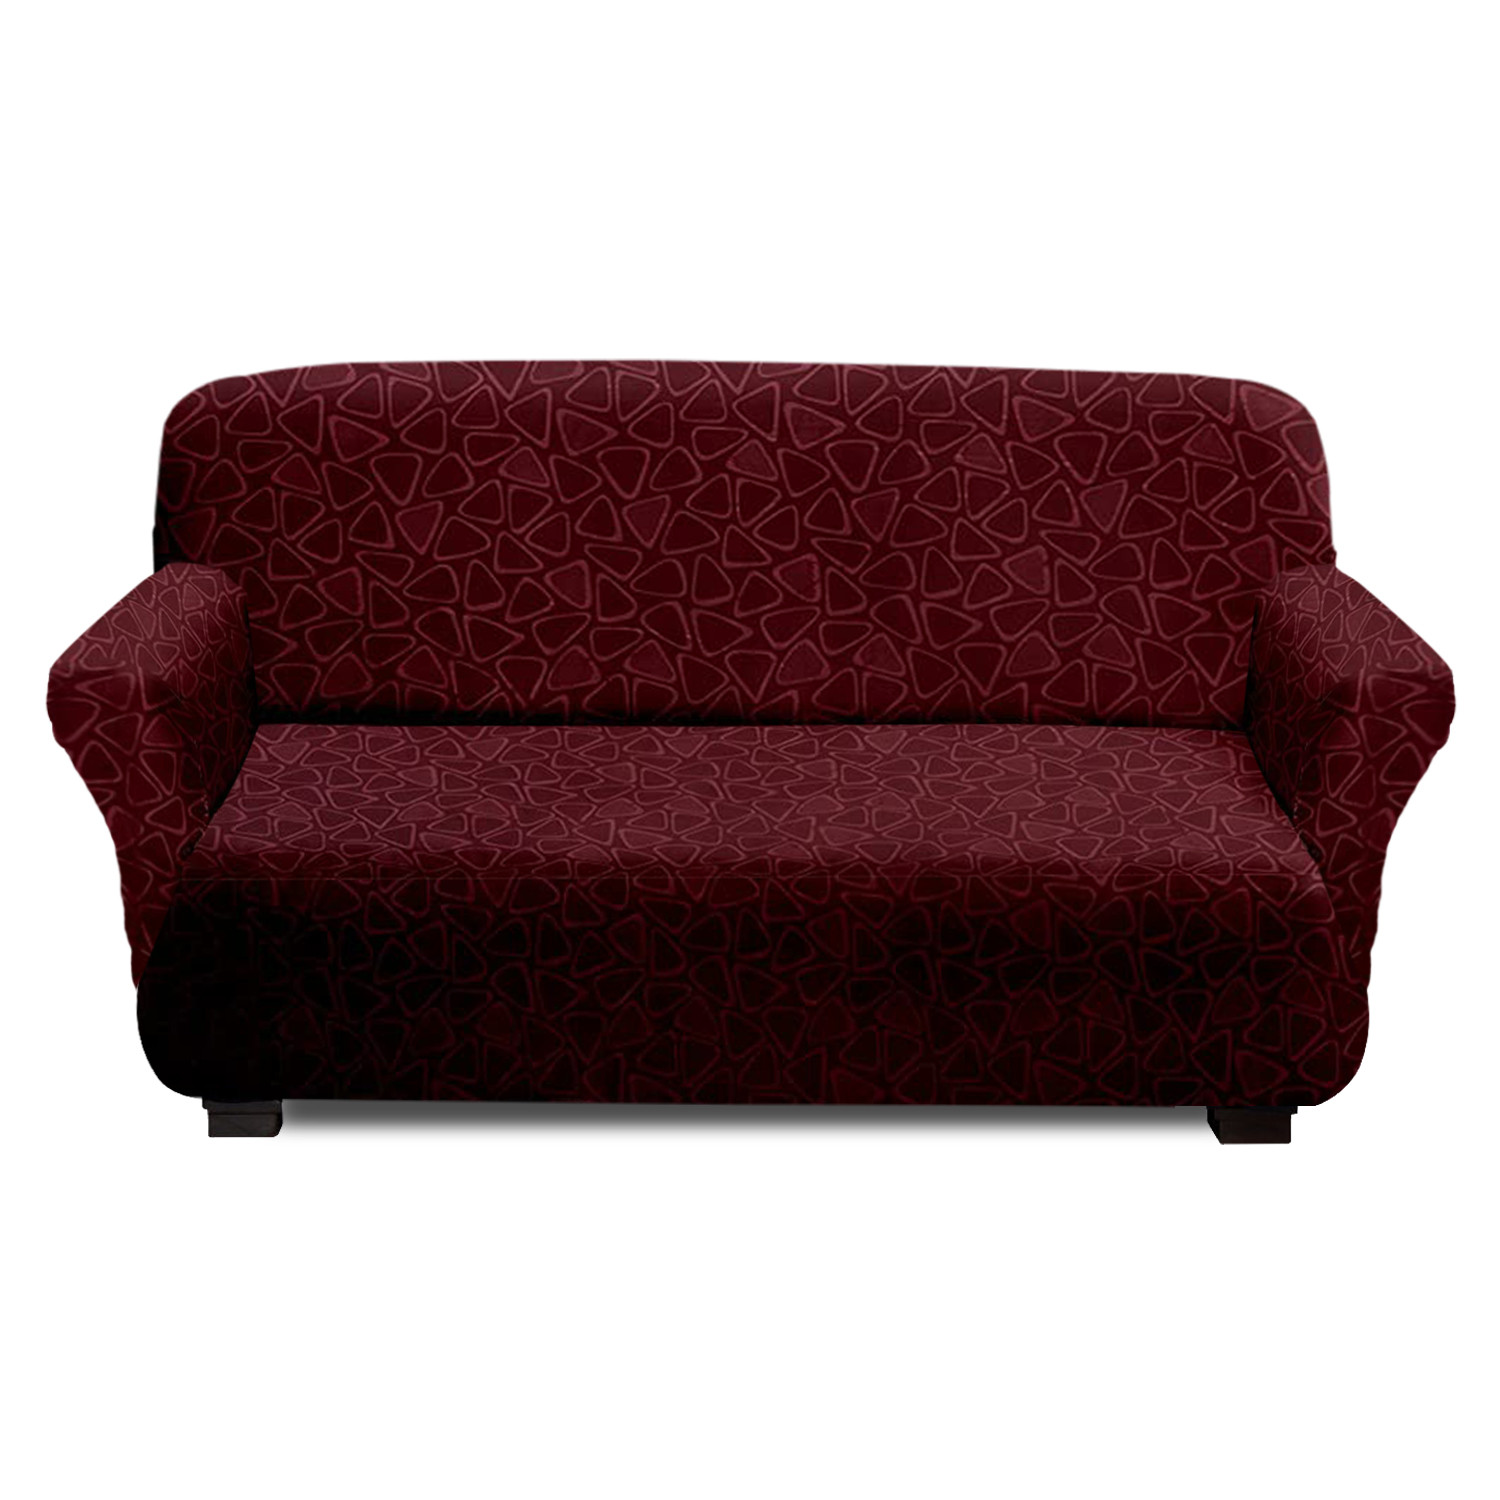 Kuber Industries Triangle Printed Stretchable, Non-Slip Polyster 1 & 3 Seater Sofa Cover/Slipcover/Protector Set With Foam Stick, Set of 2 (Maroon)